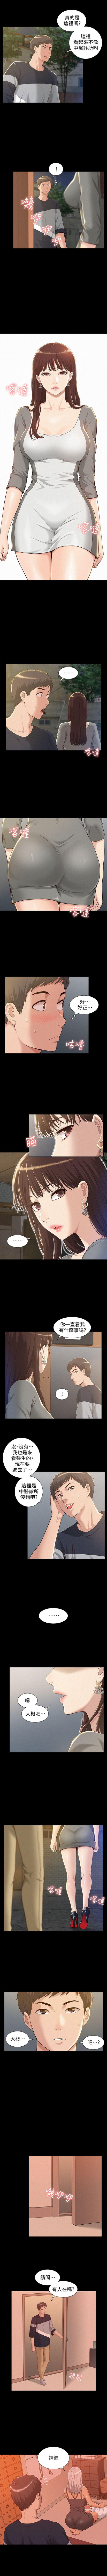 Dick Sucking （周4）难言之隐 1-18 中文翻译（更新中） Old And Young - Page 7